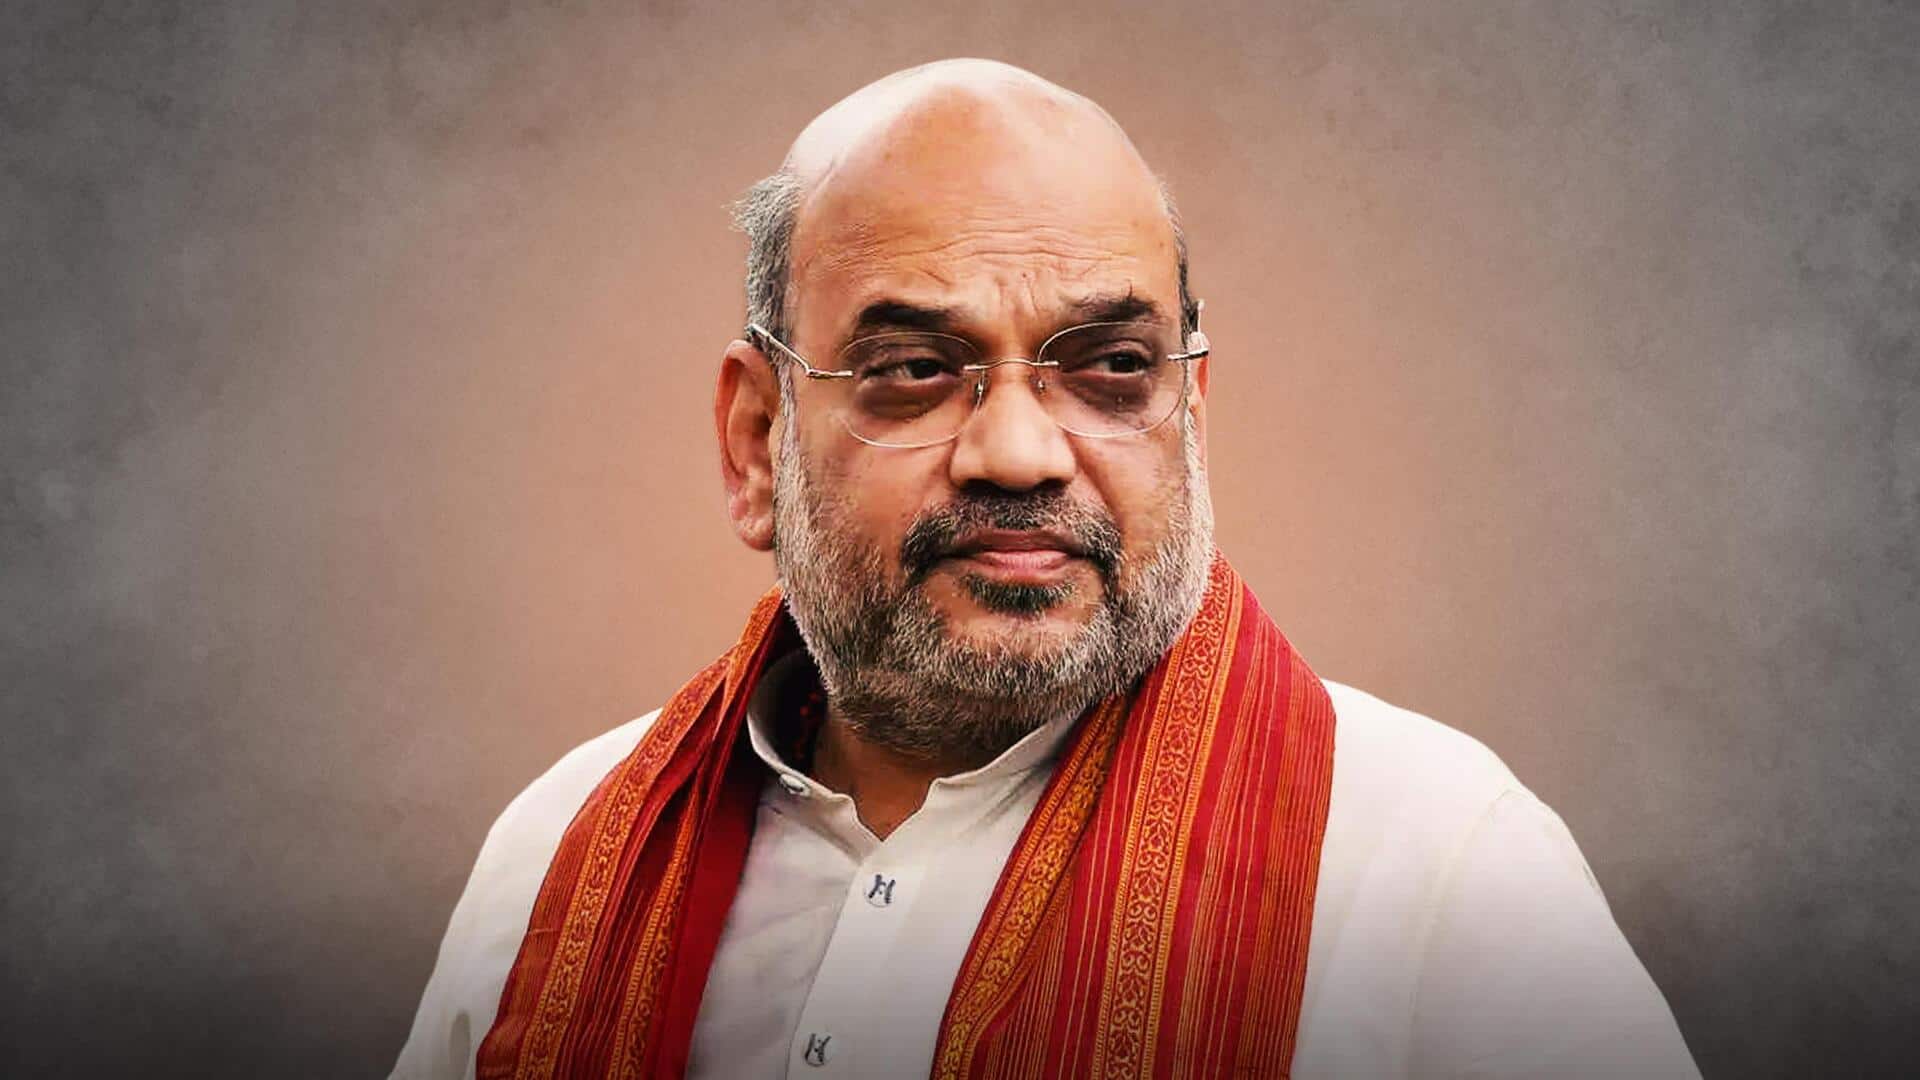 'Won't allow Manipur to break apart': Shah campaigns in Imphal